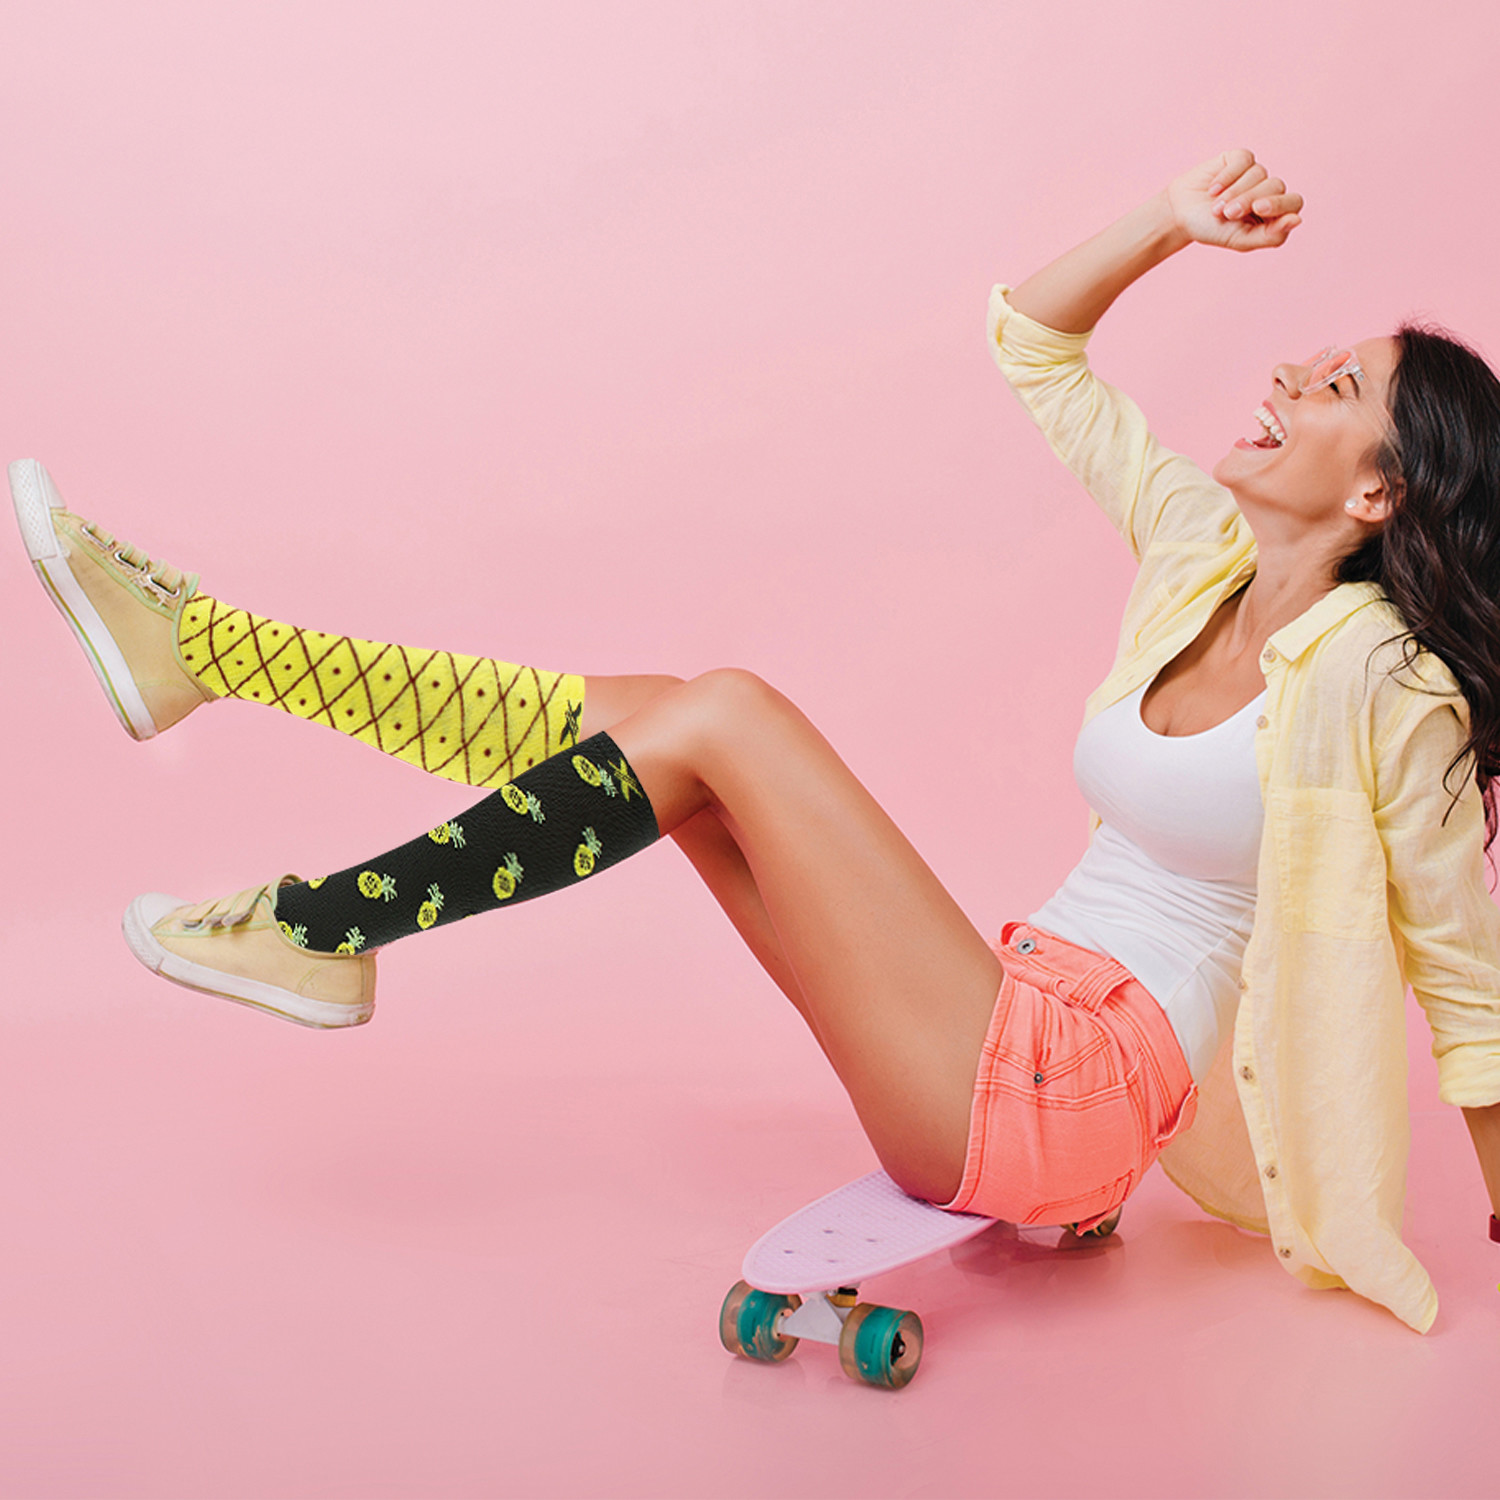 Pineapple Compression Socks with Skateboard and Young Woman